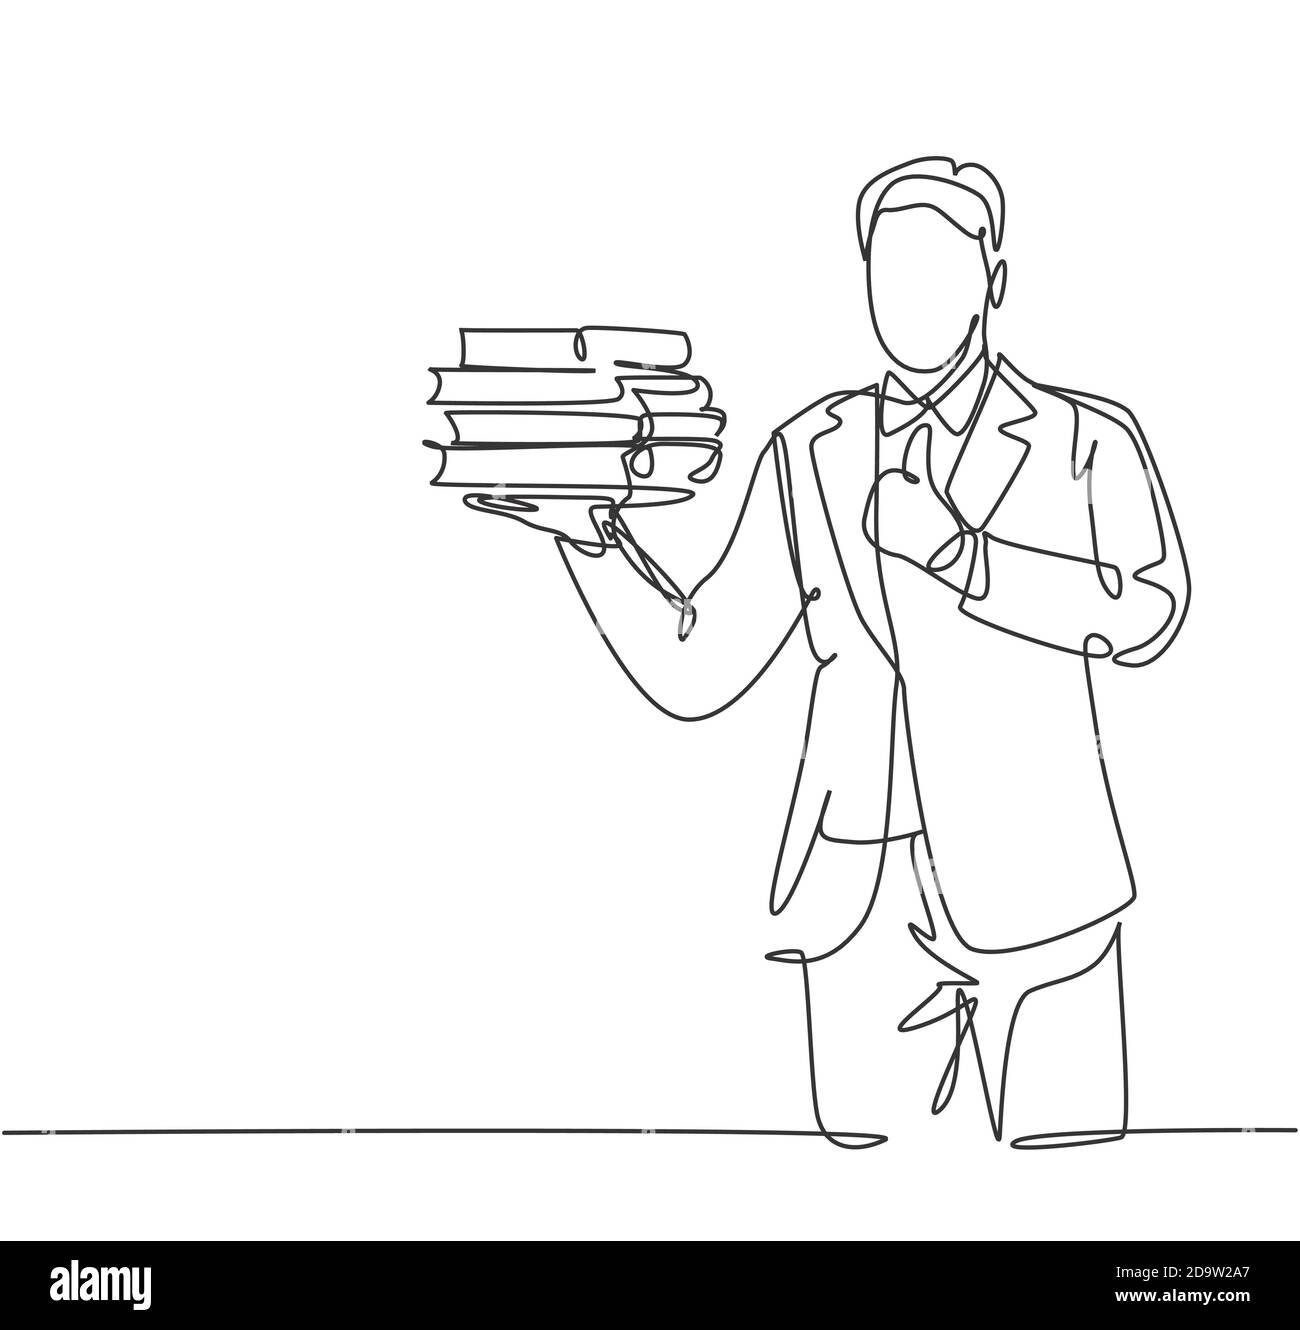 https://c8.alamy.com/comp/2D9W2A7/single-line-drawing-young-business-man-carrying-stack-of-books-on-his-hand-and-giving-thumbs-up-gesture-business-education-concept-continuous-line-2D9W2A7.jpg